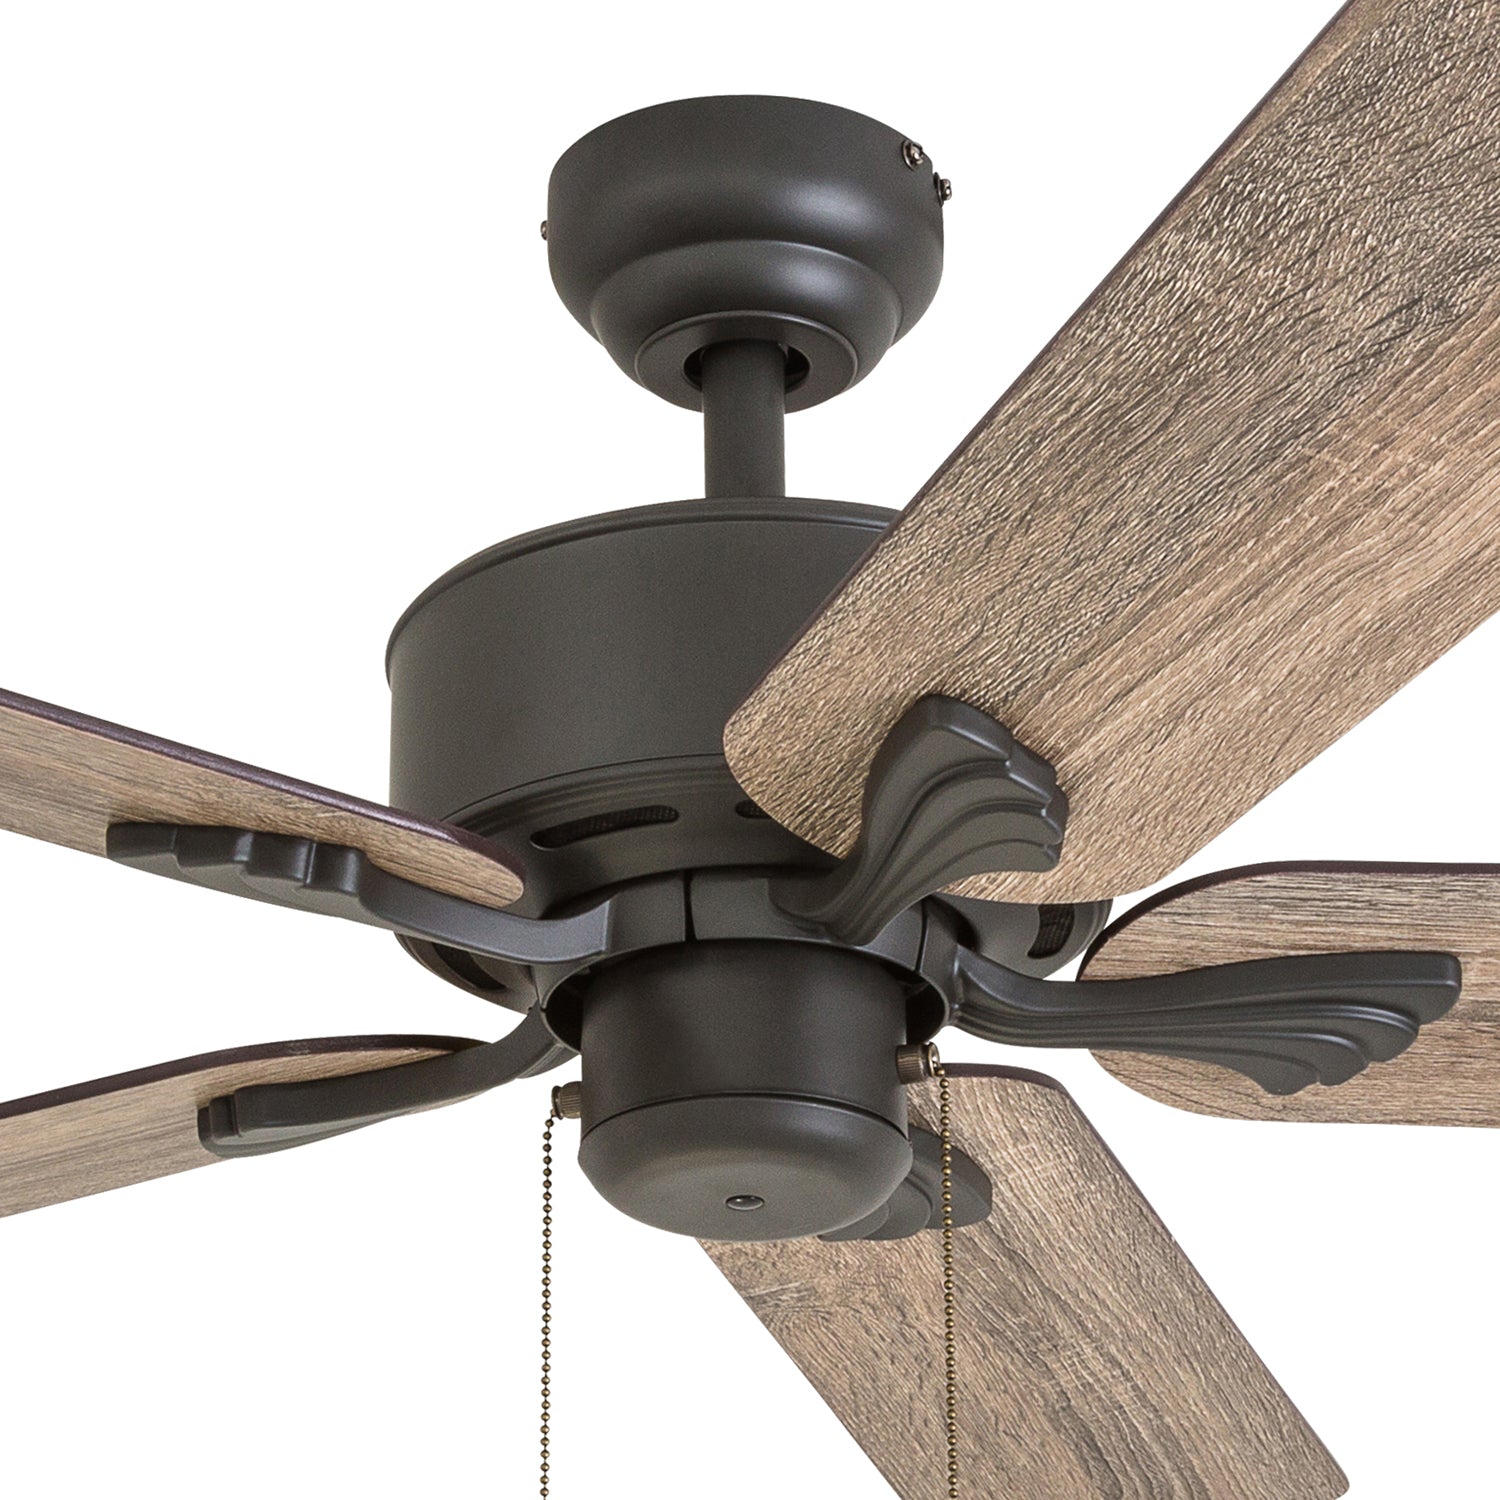 52 Inch Glencrest, Bronze, Pull Chain, Ceiling Fan by Prominence Home